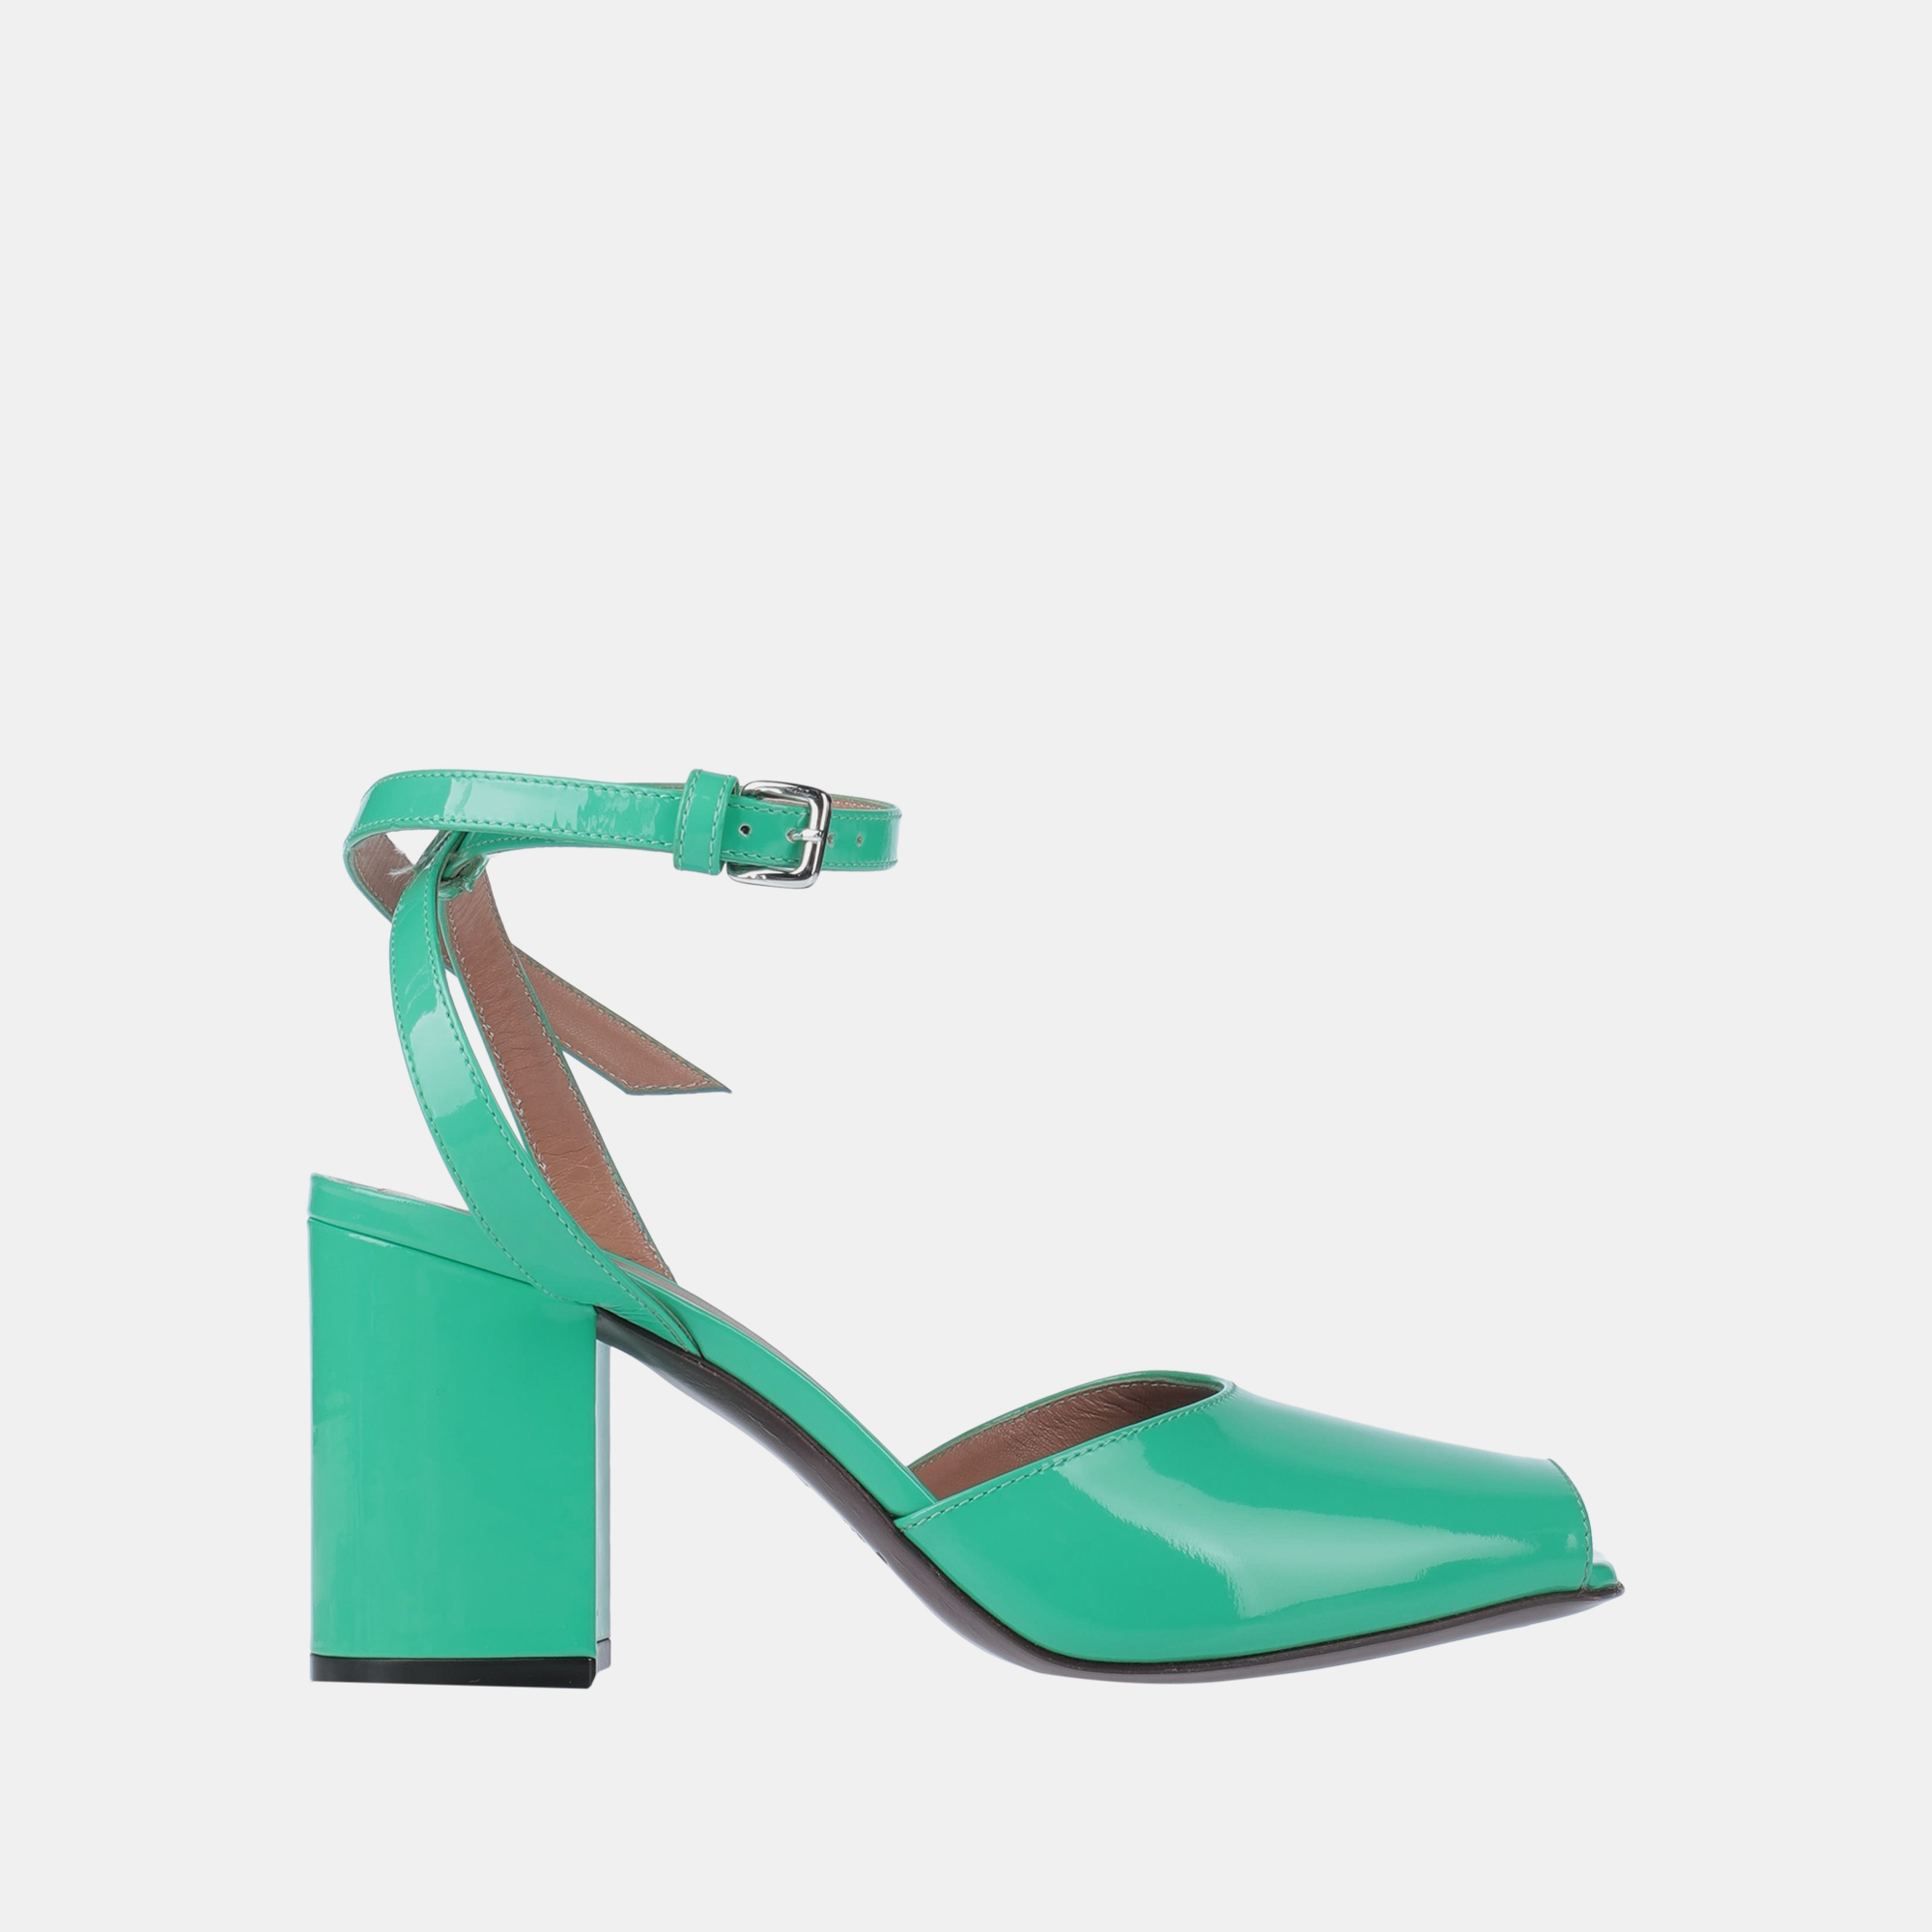 Marni patent leather ankle strap sandals size 36